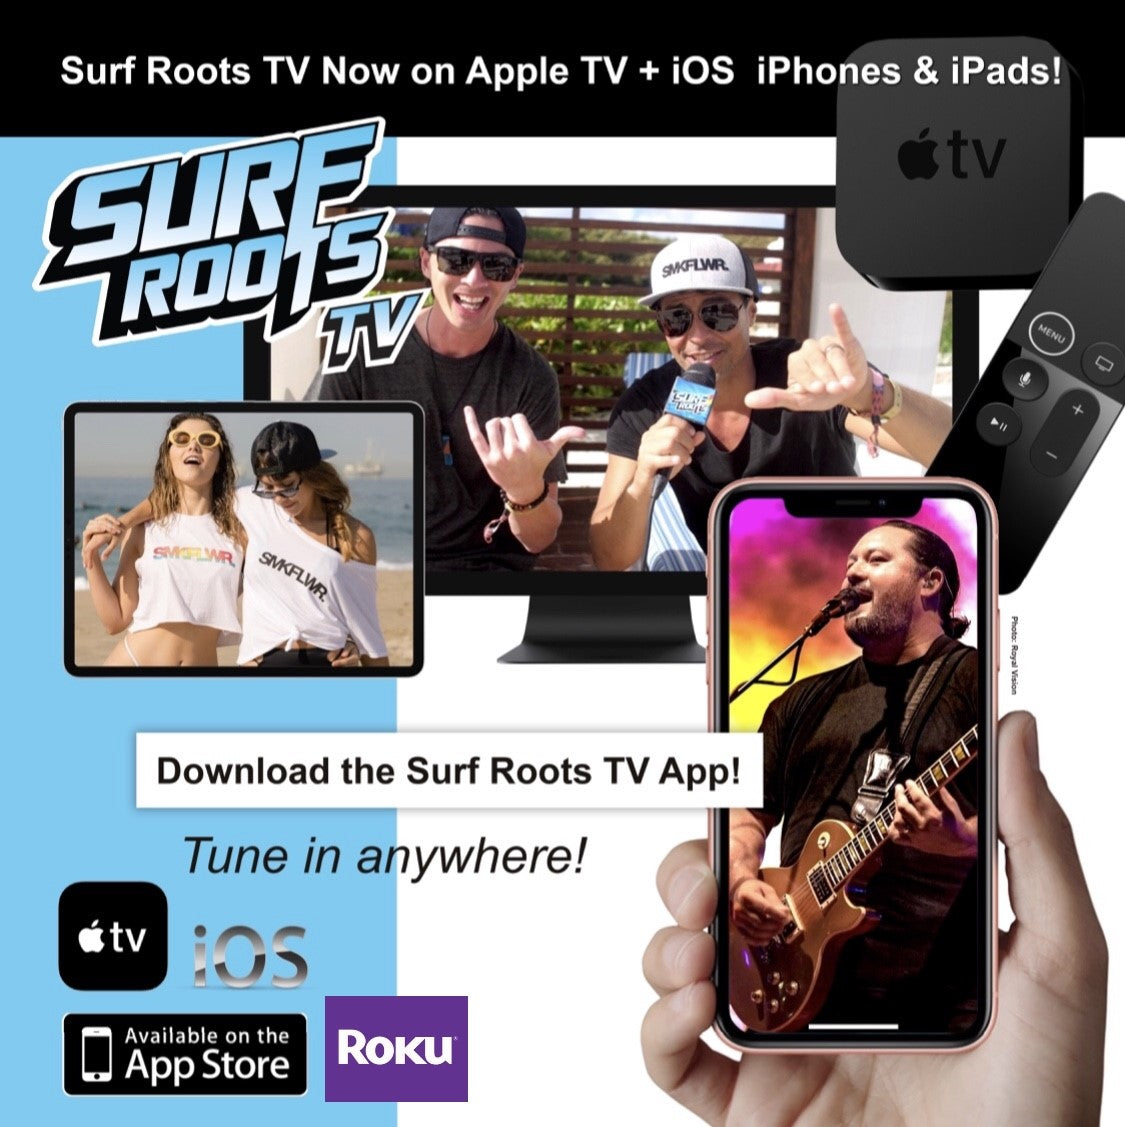 Surf Roots TV App now on iPhone & iPad!